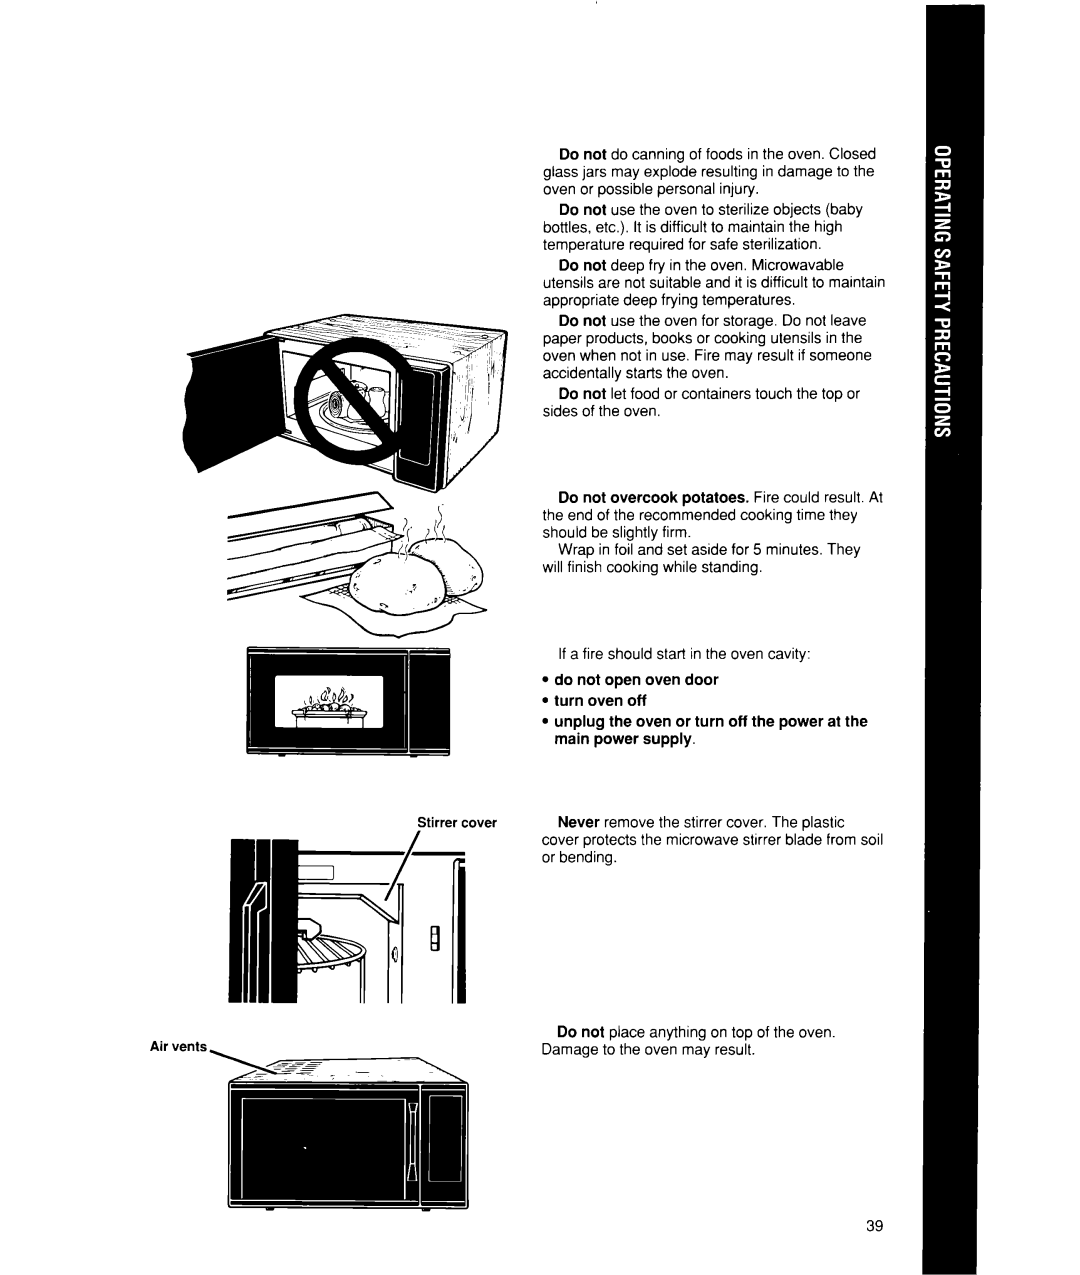 Whirlpool MW7500XW manual If a fire should start in the oven cavity 